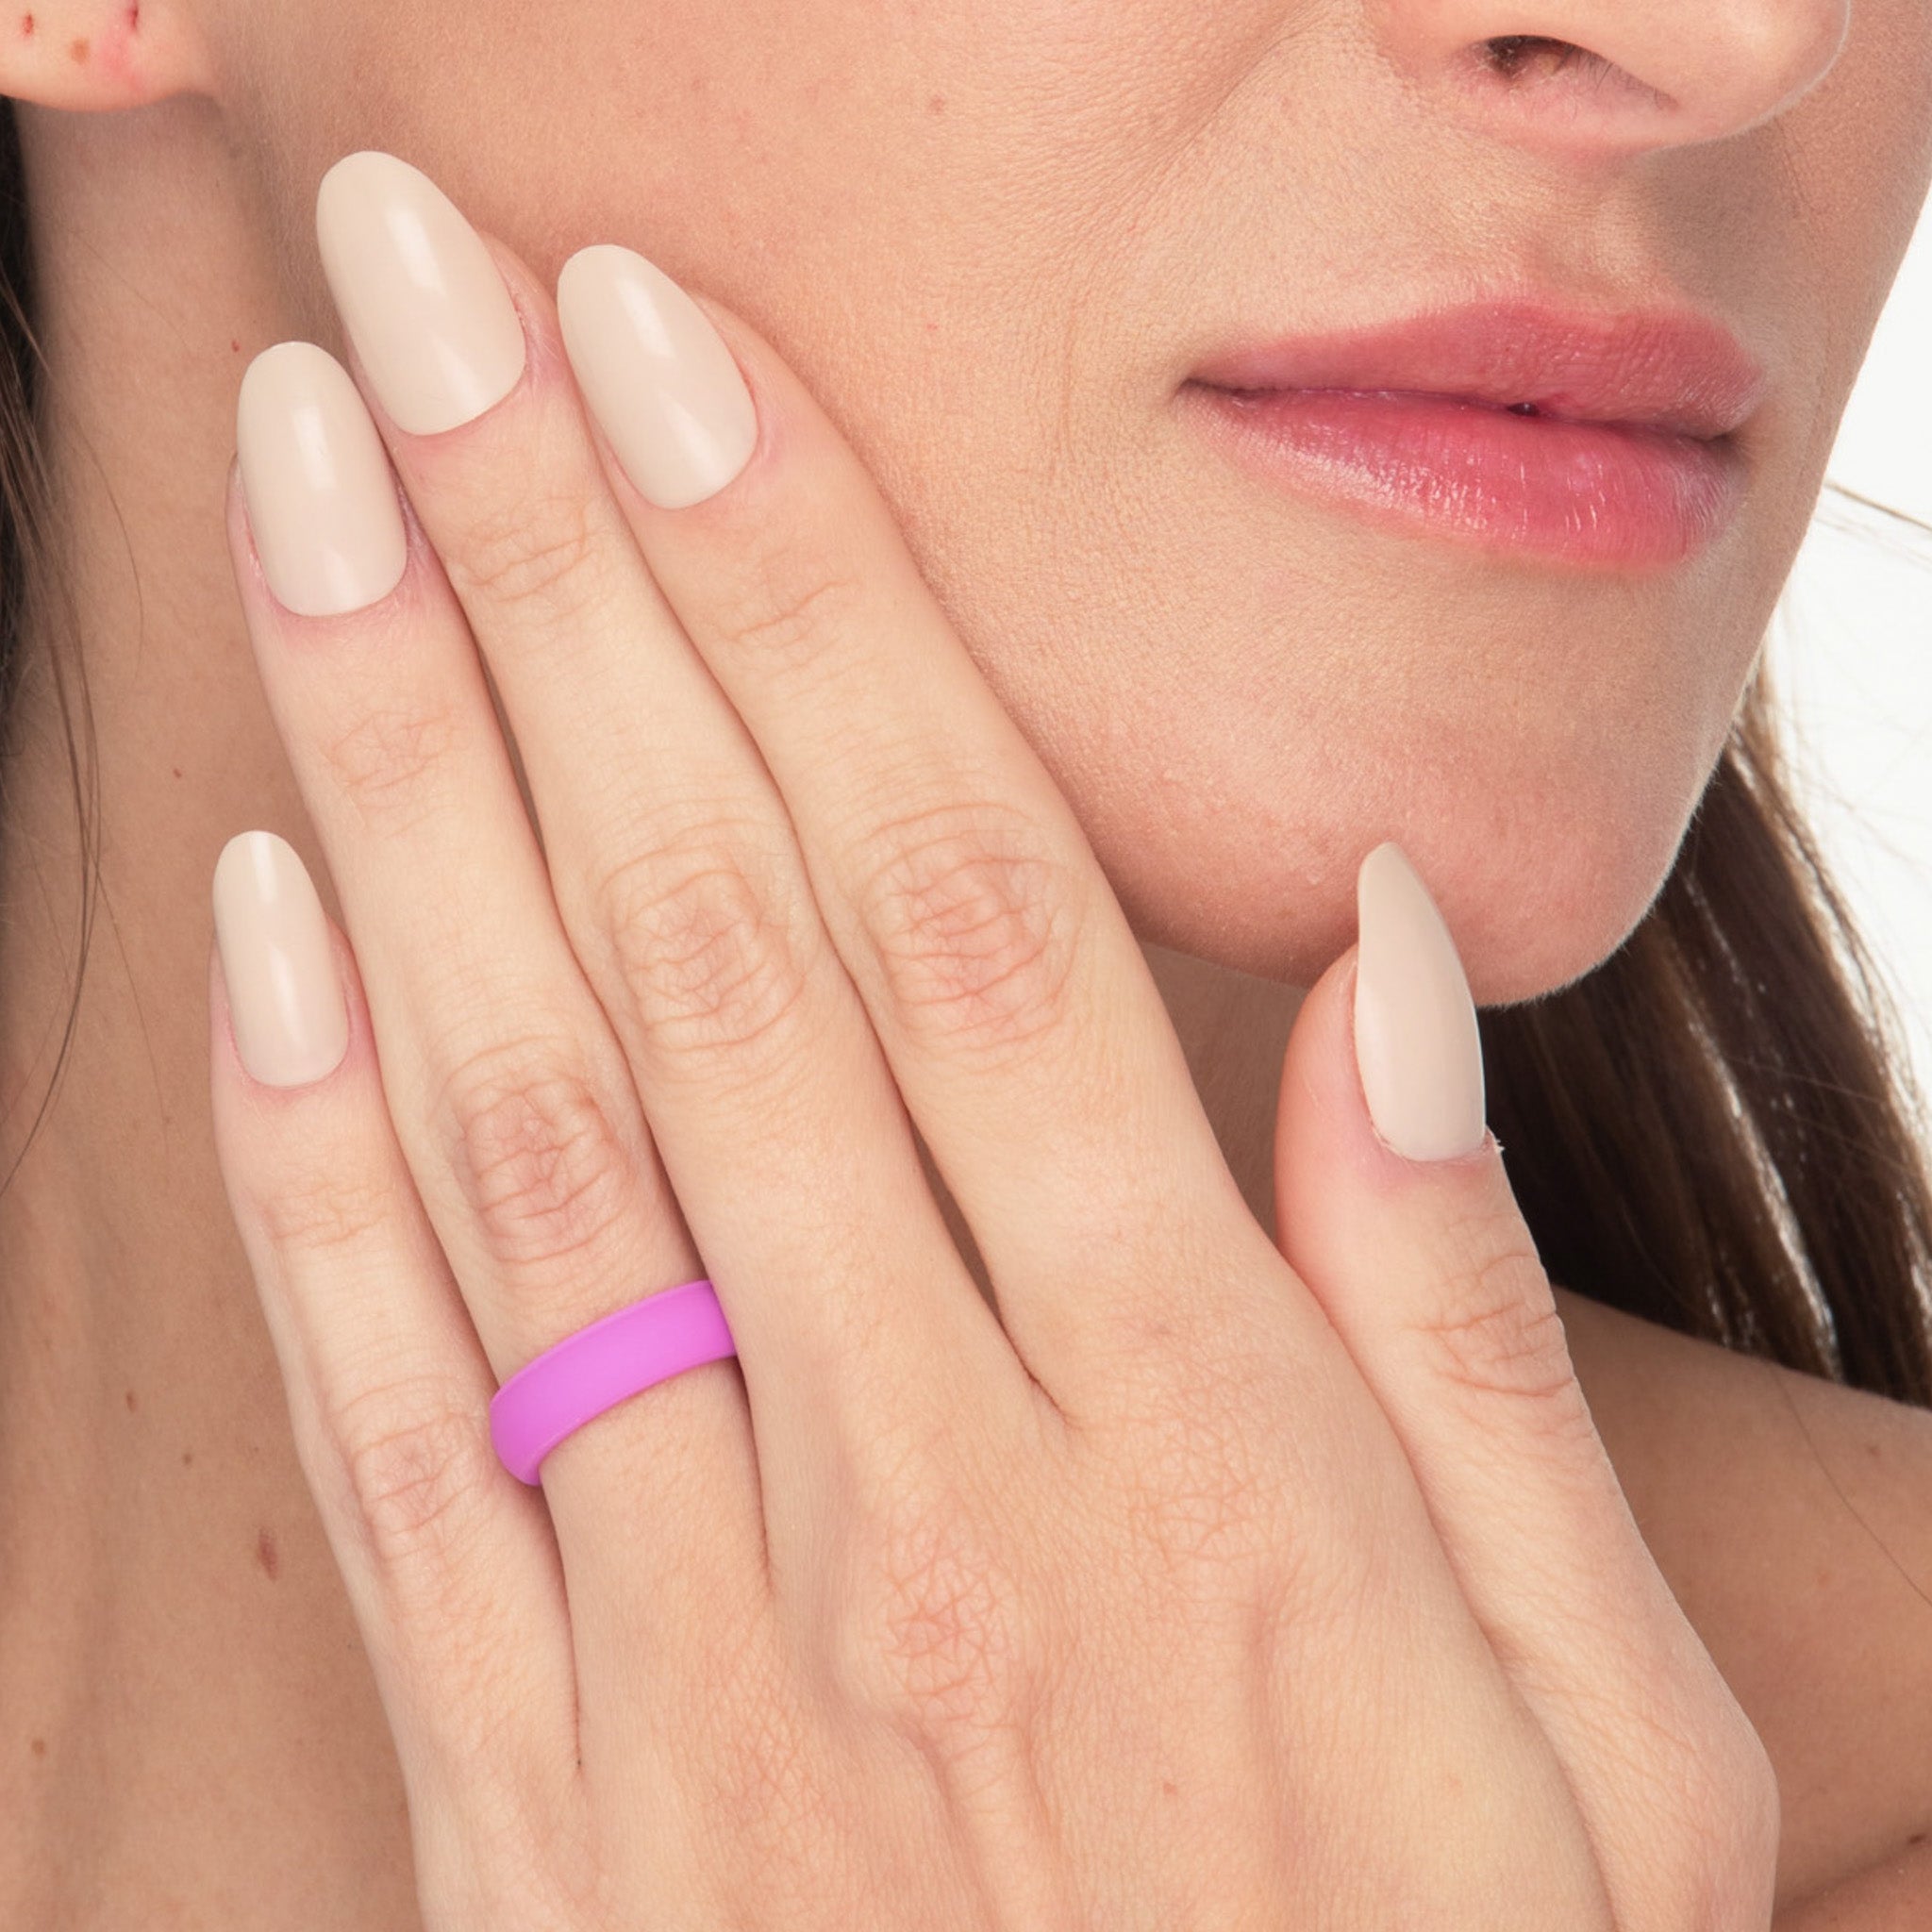 The Orchid - Silicone Ring